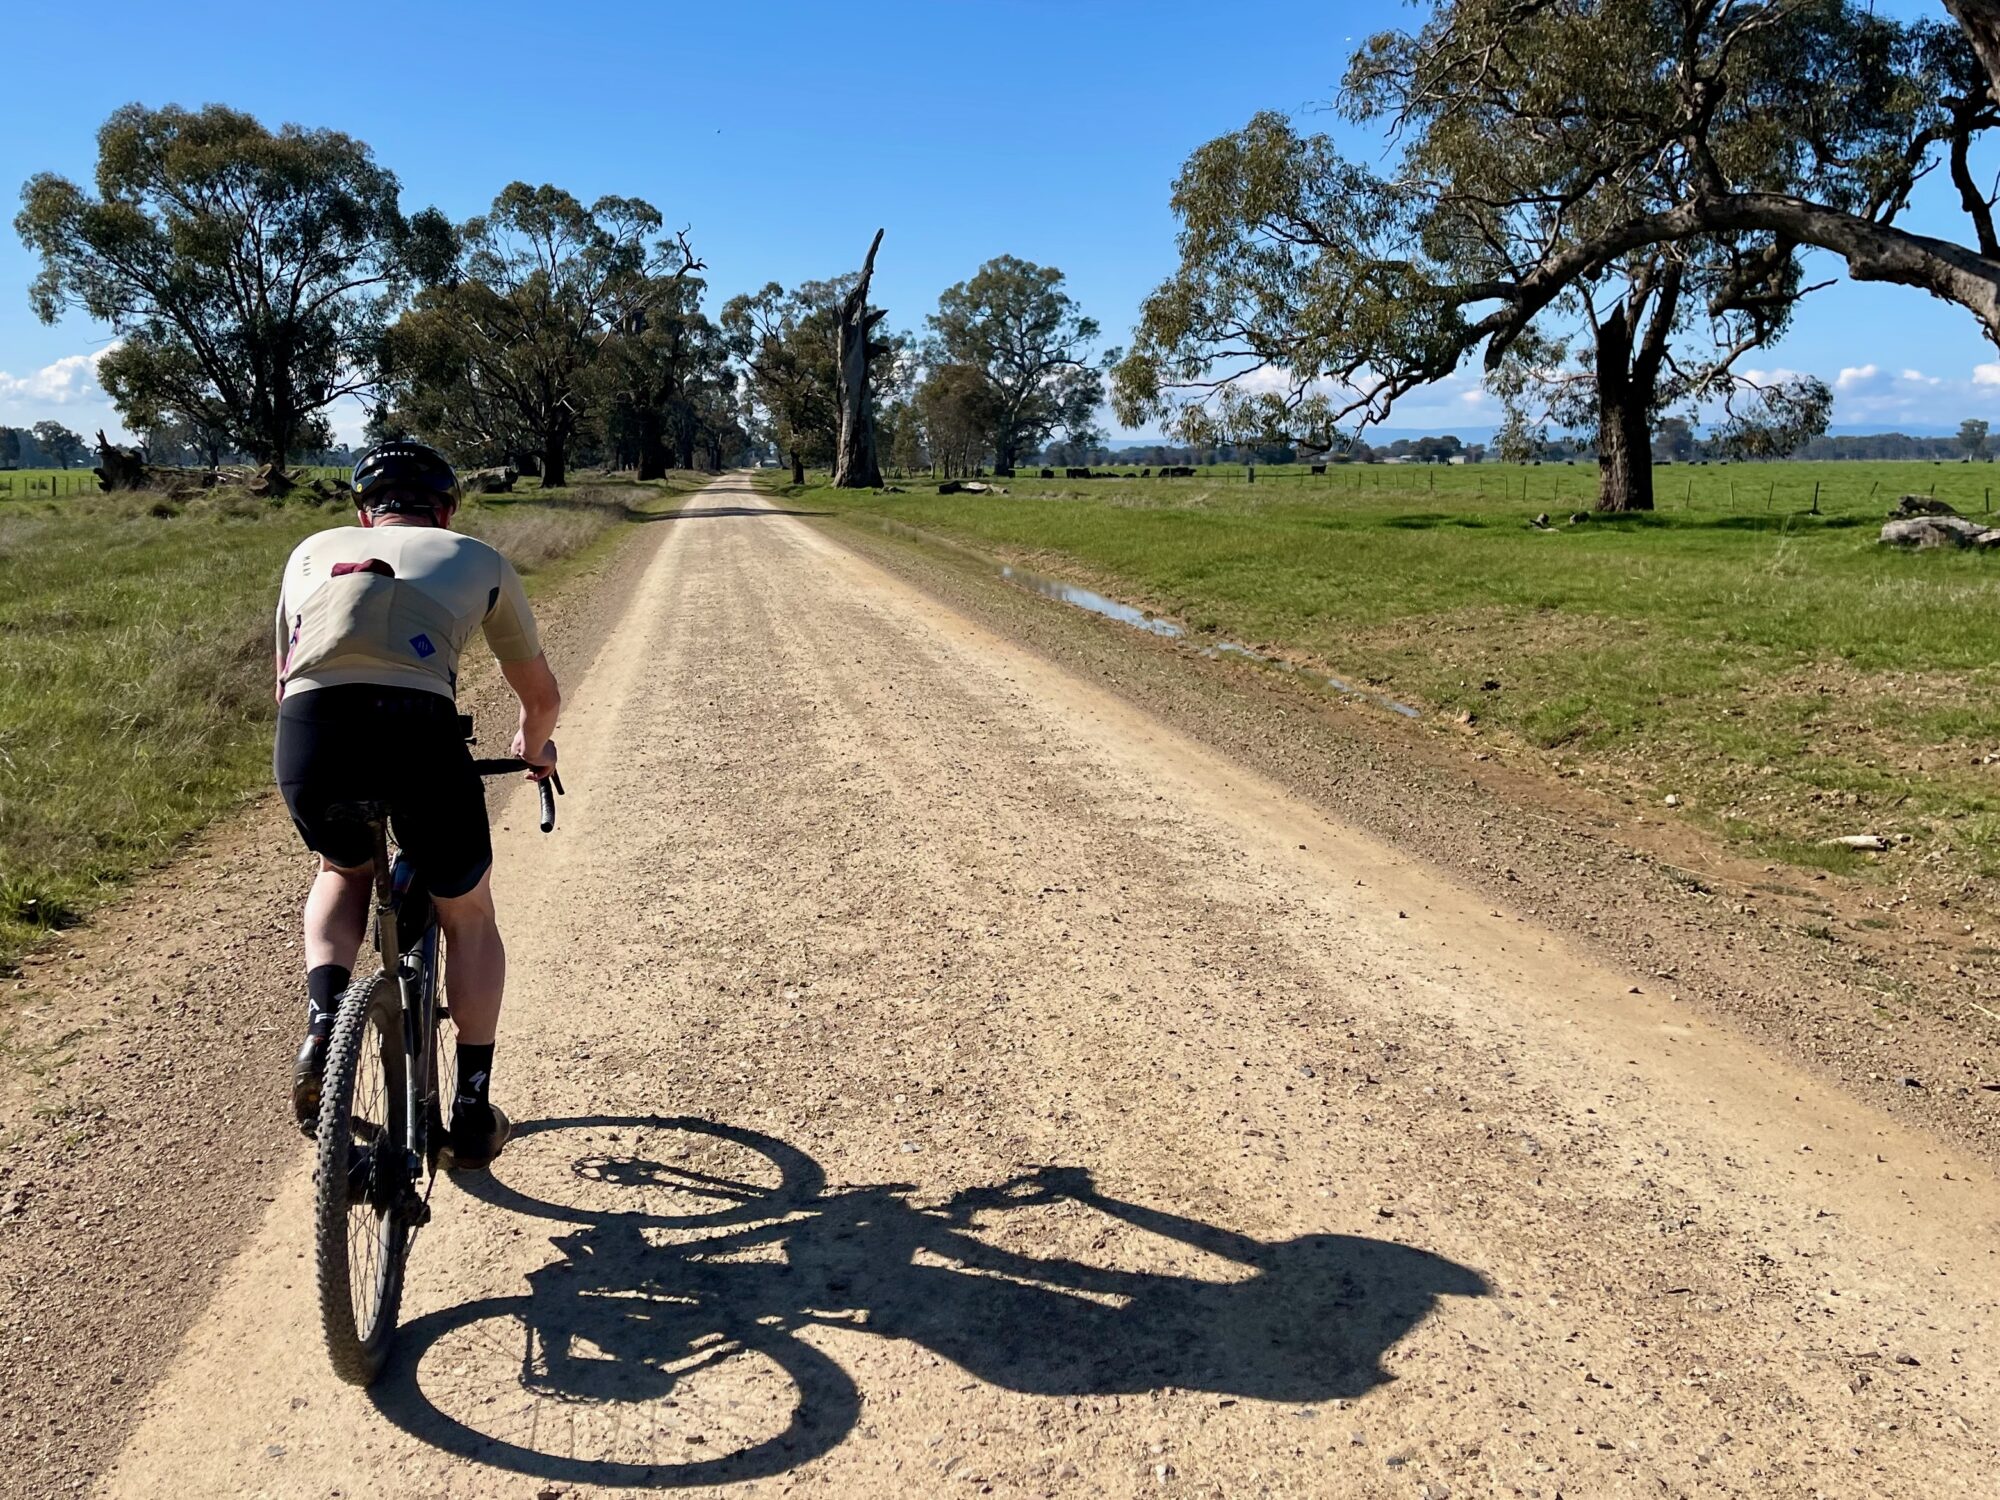 Cyclist riding on smooth gravel road through open farmland on a sunny day